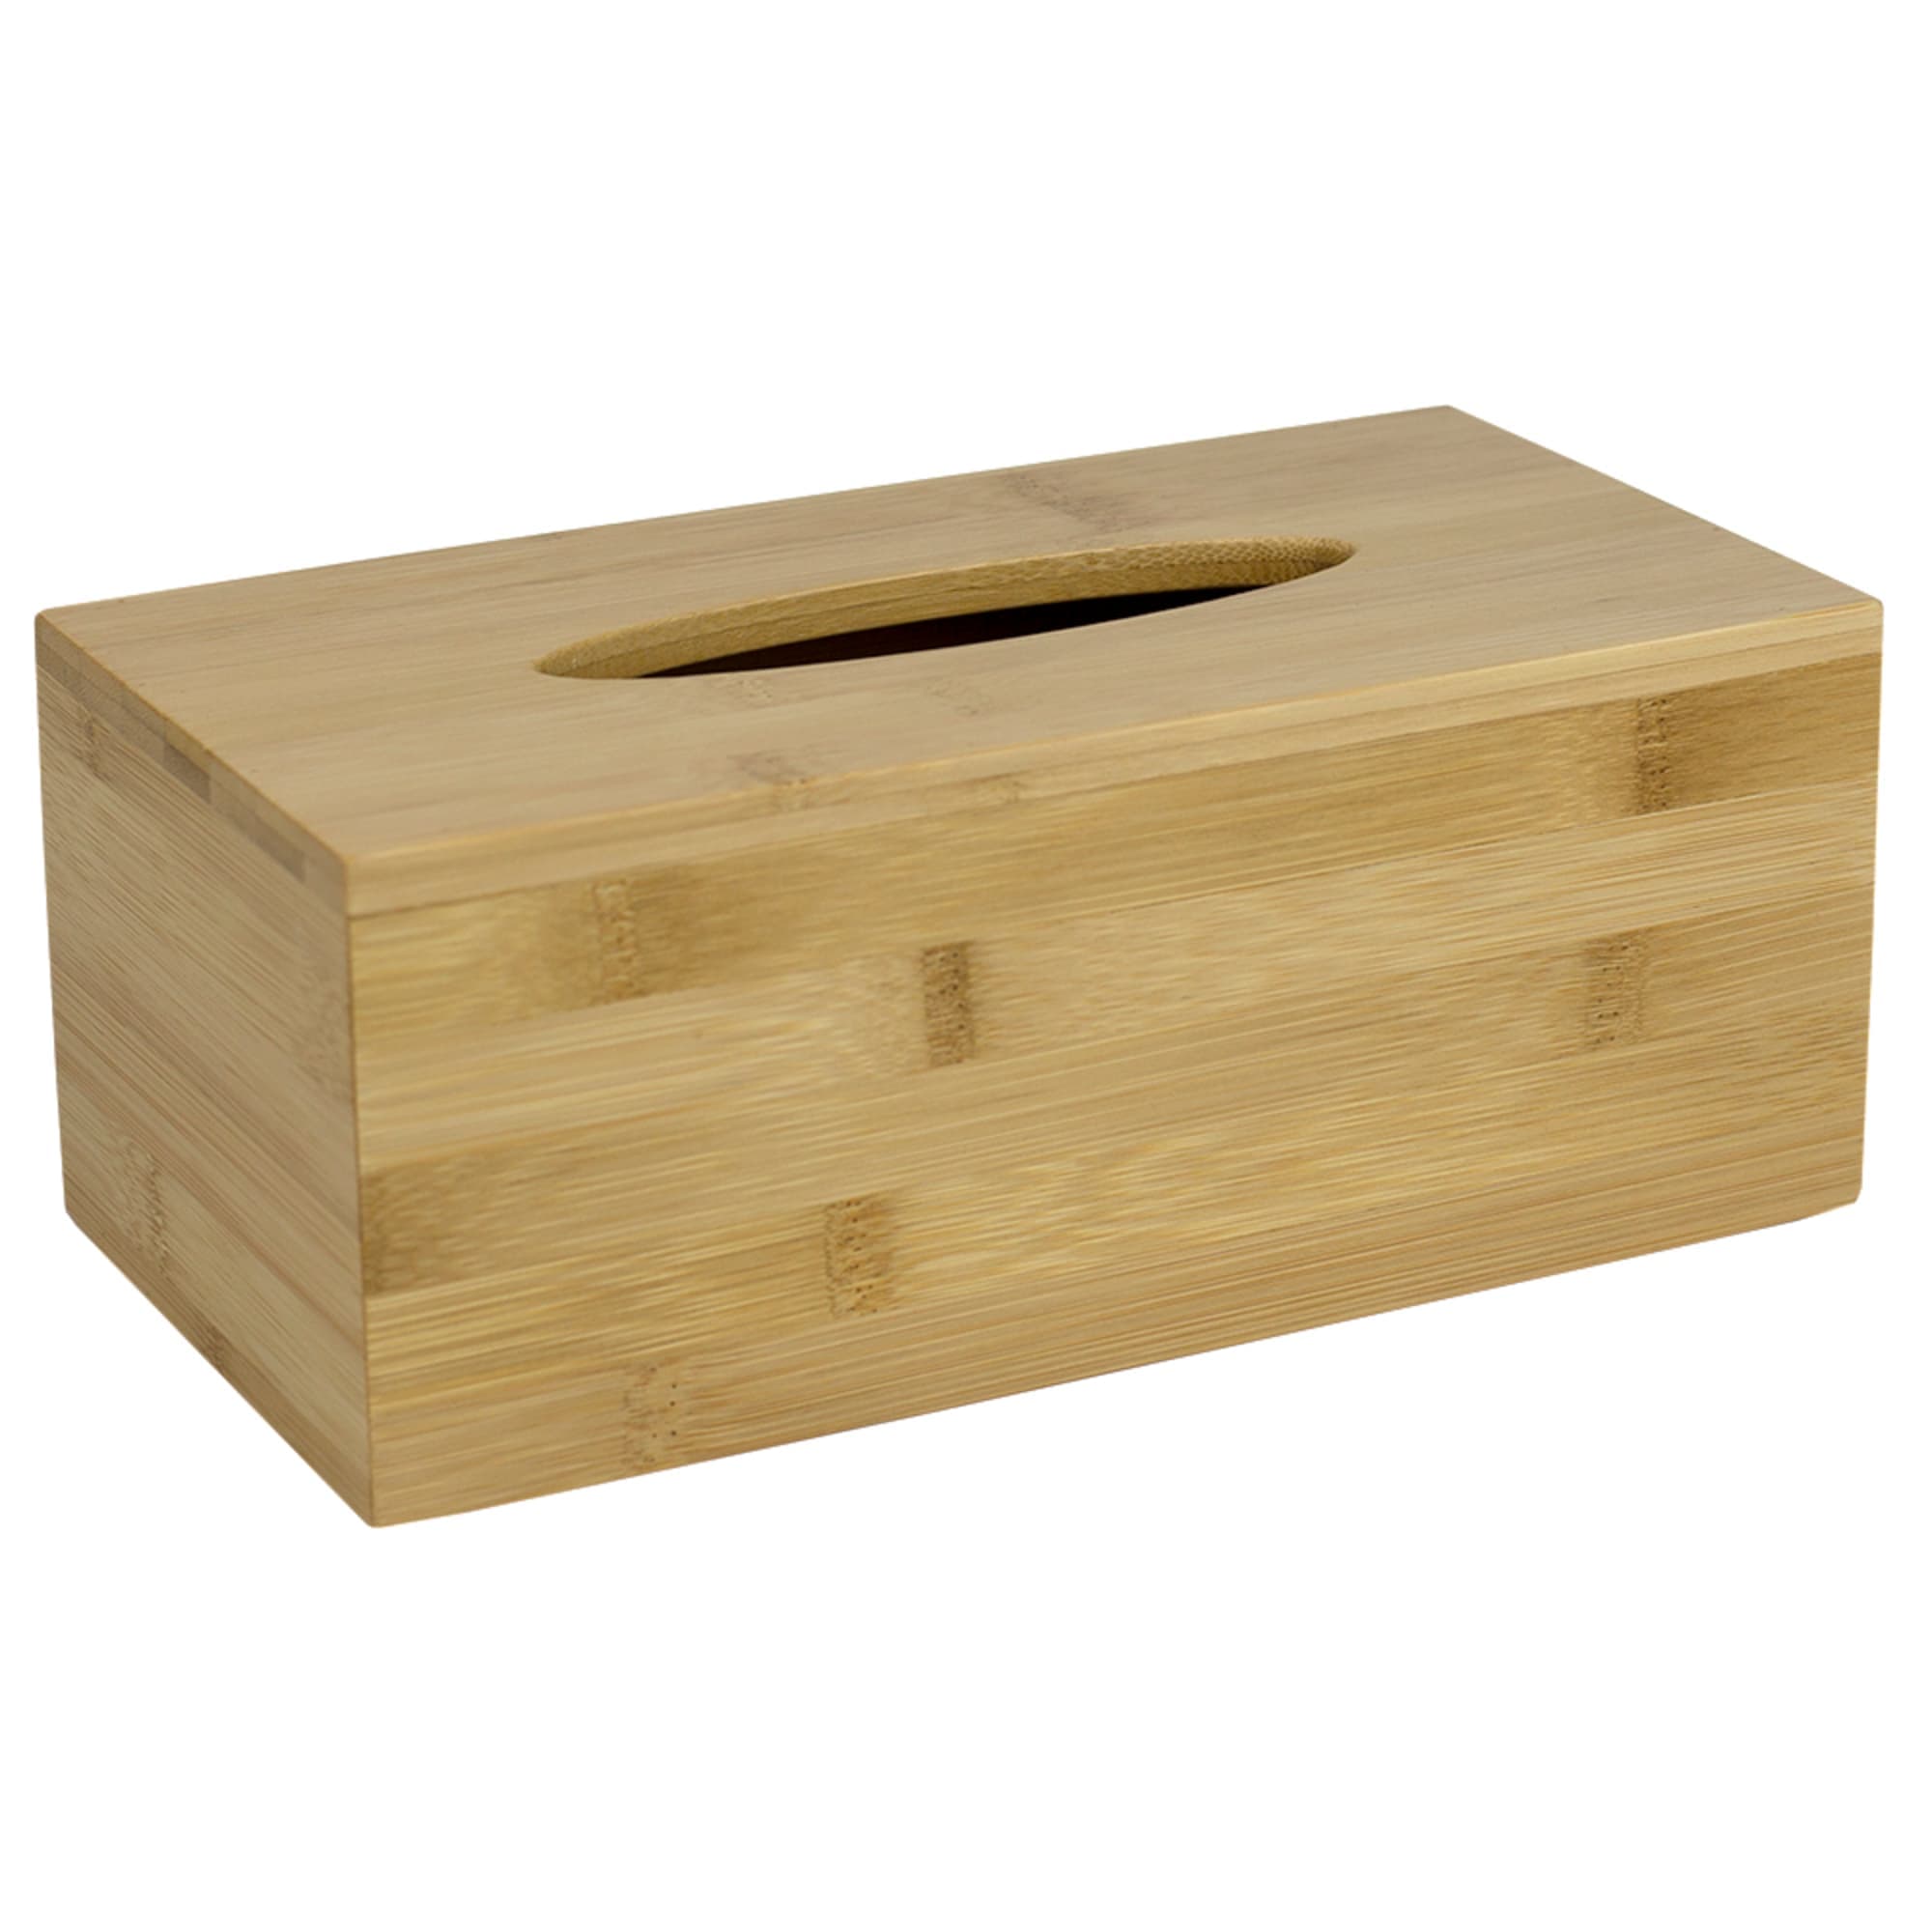 Home Basics Rectangle Bamboo Tissue Box Cover, Natural $7 EACH, CASE PACK OF 6